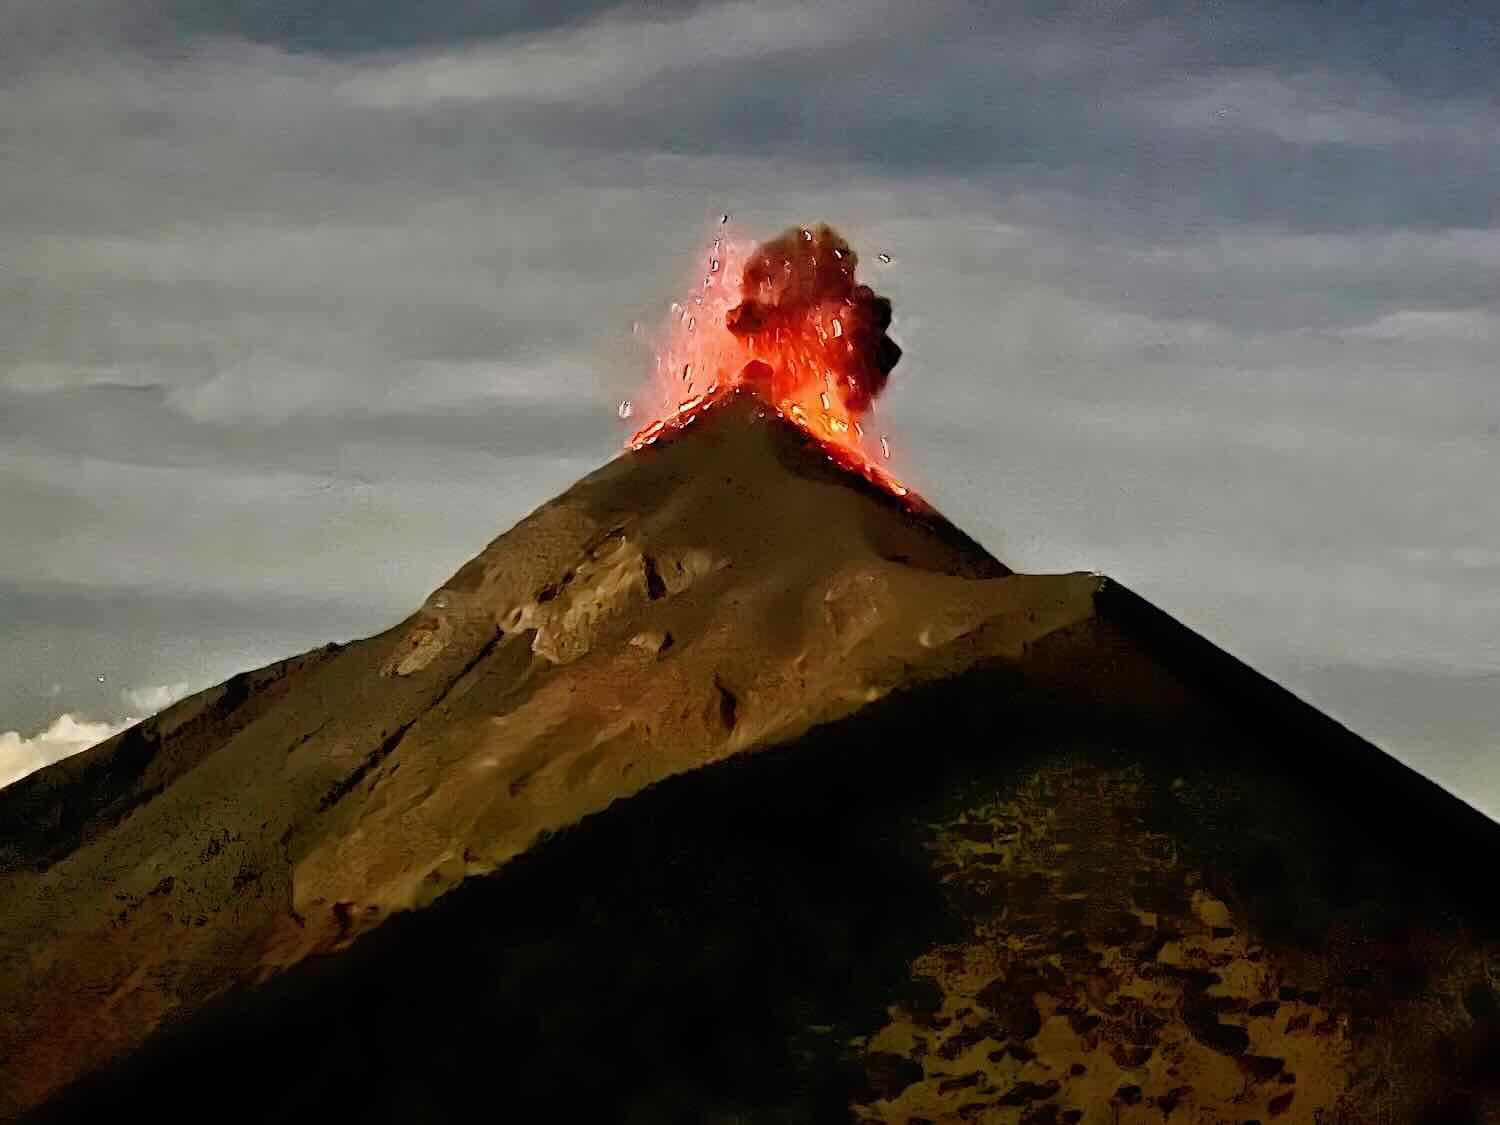 Molten rock shoots up into the sky from the Fuego Volcano